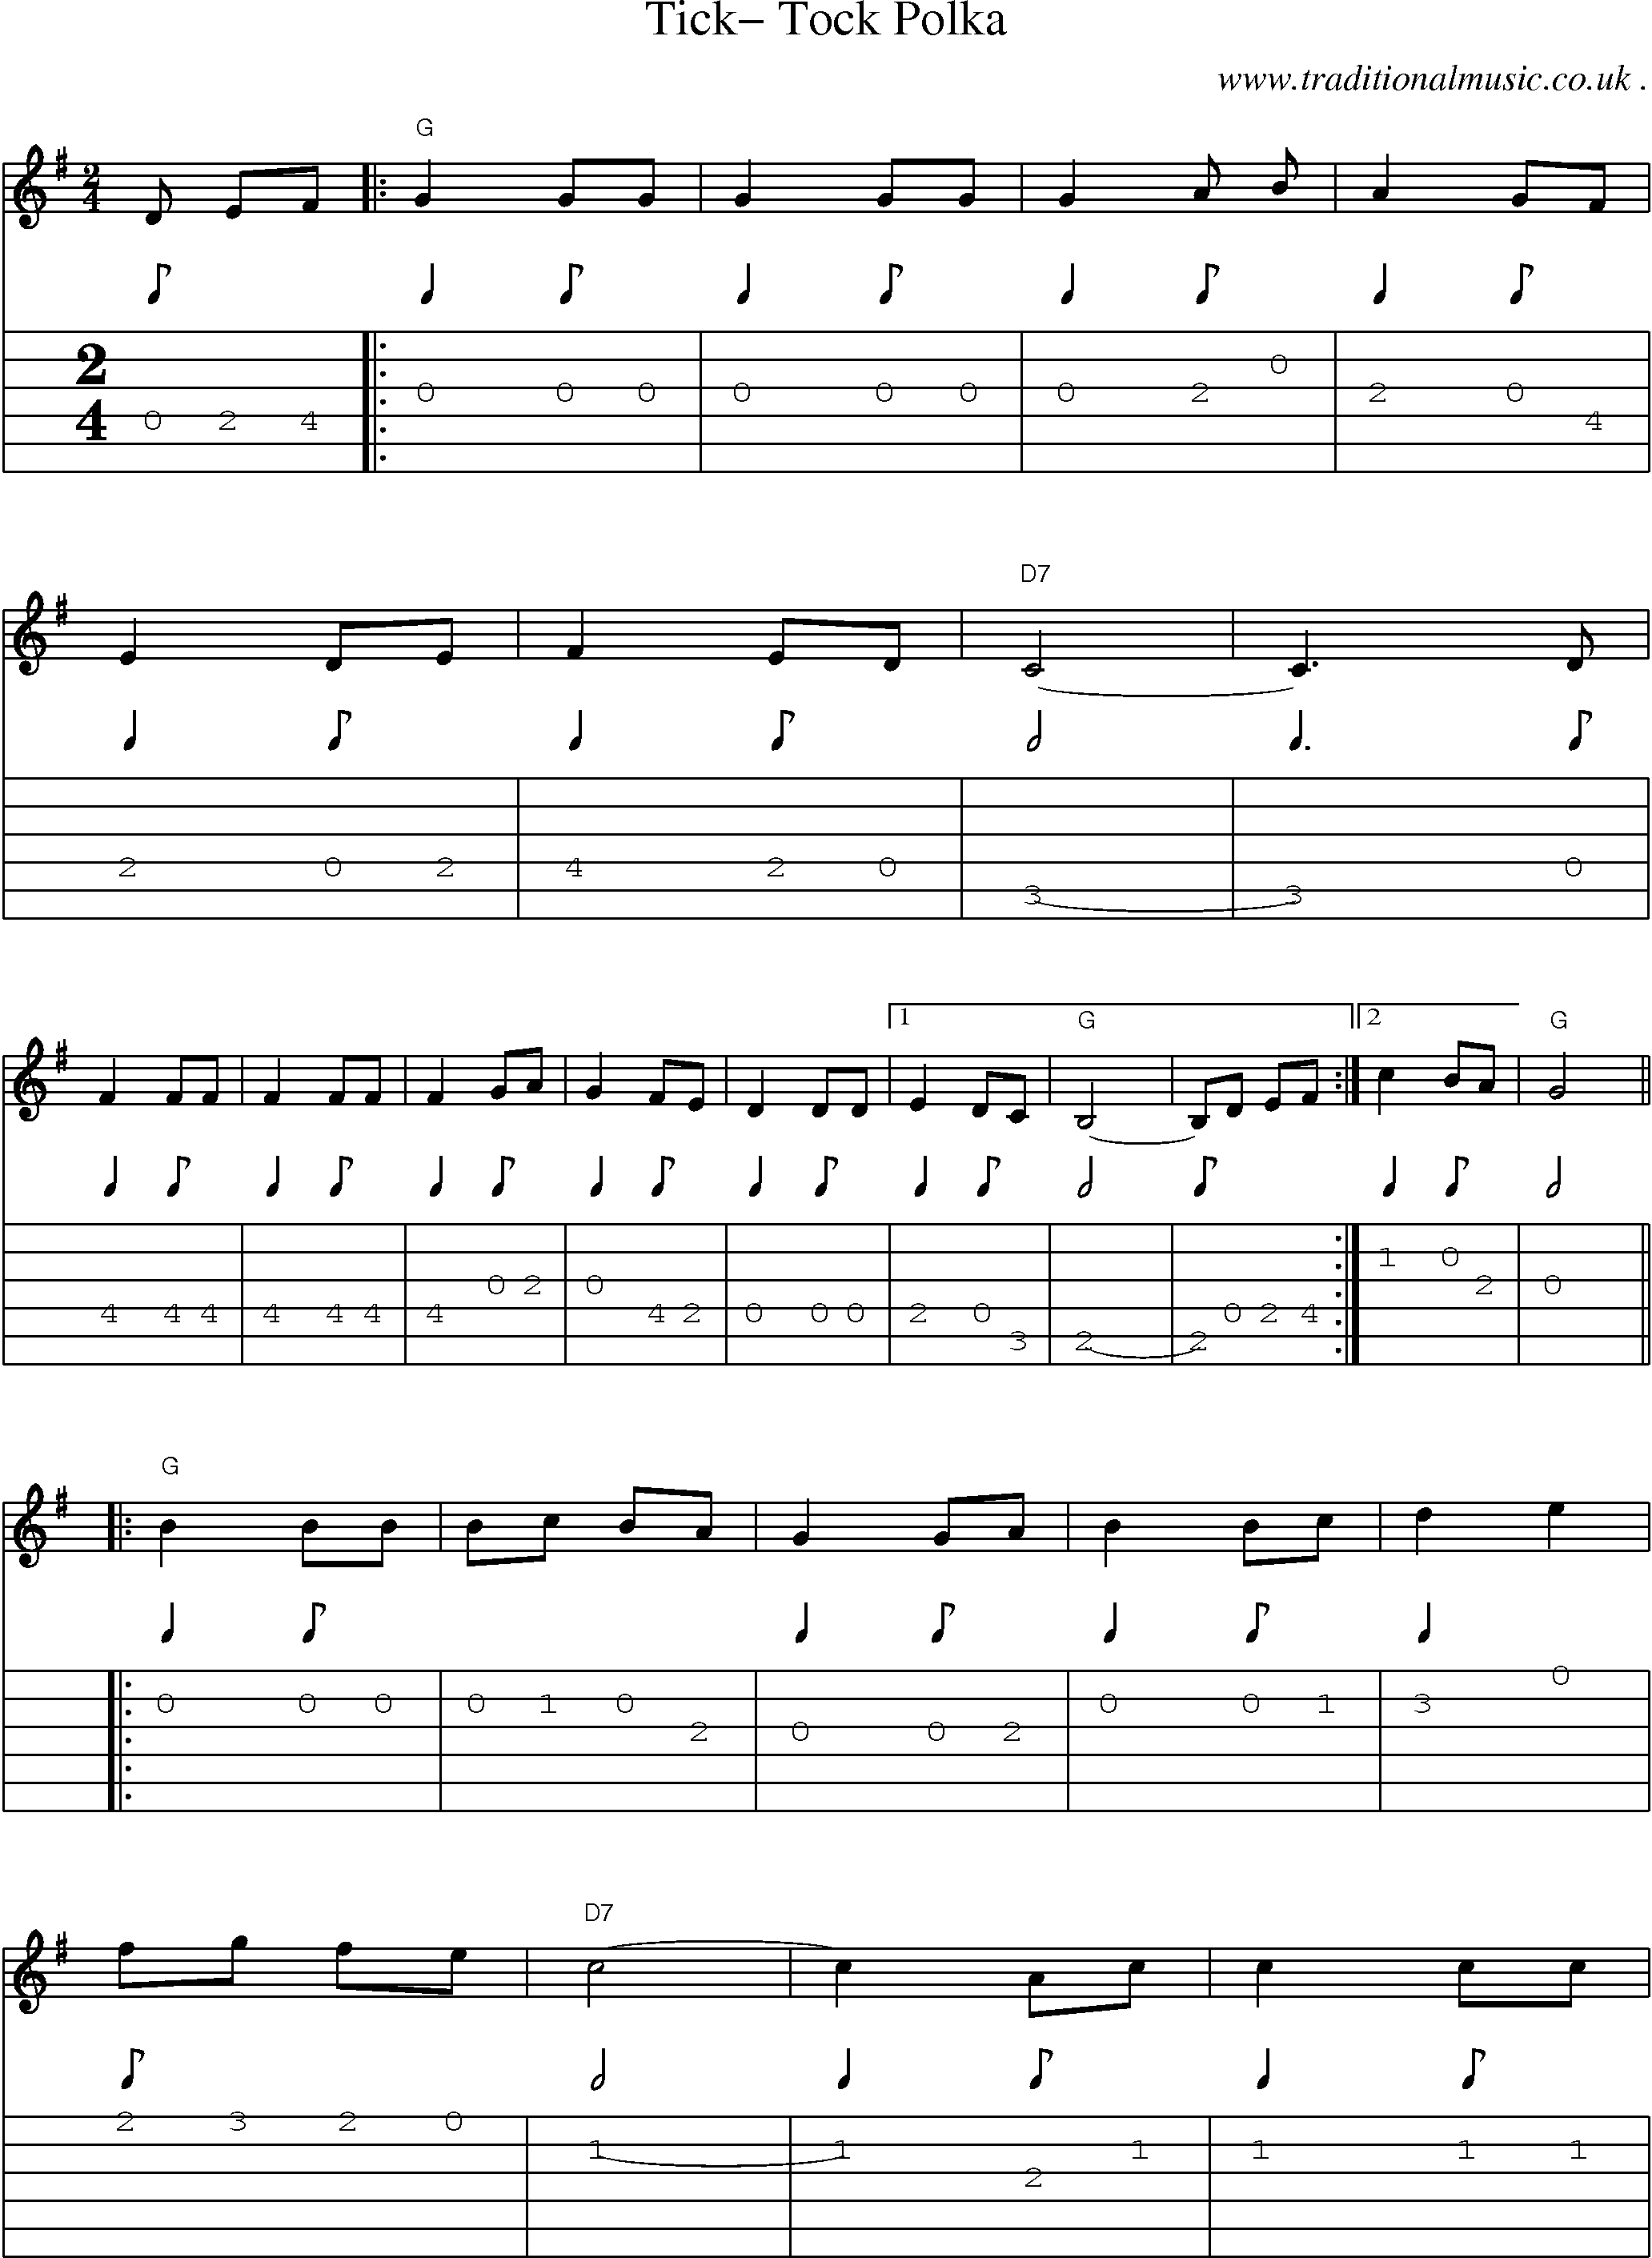 Music Score and Guitar Tabs for Tick- Tock Polka